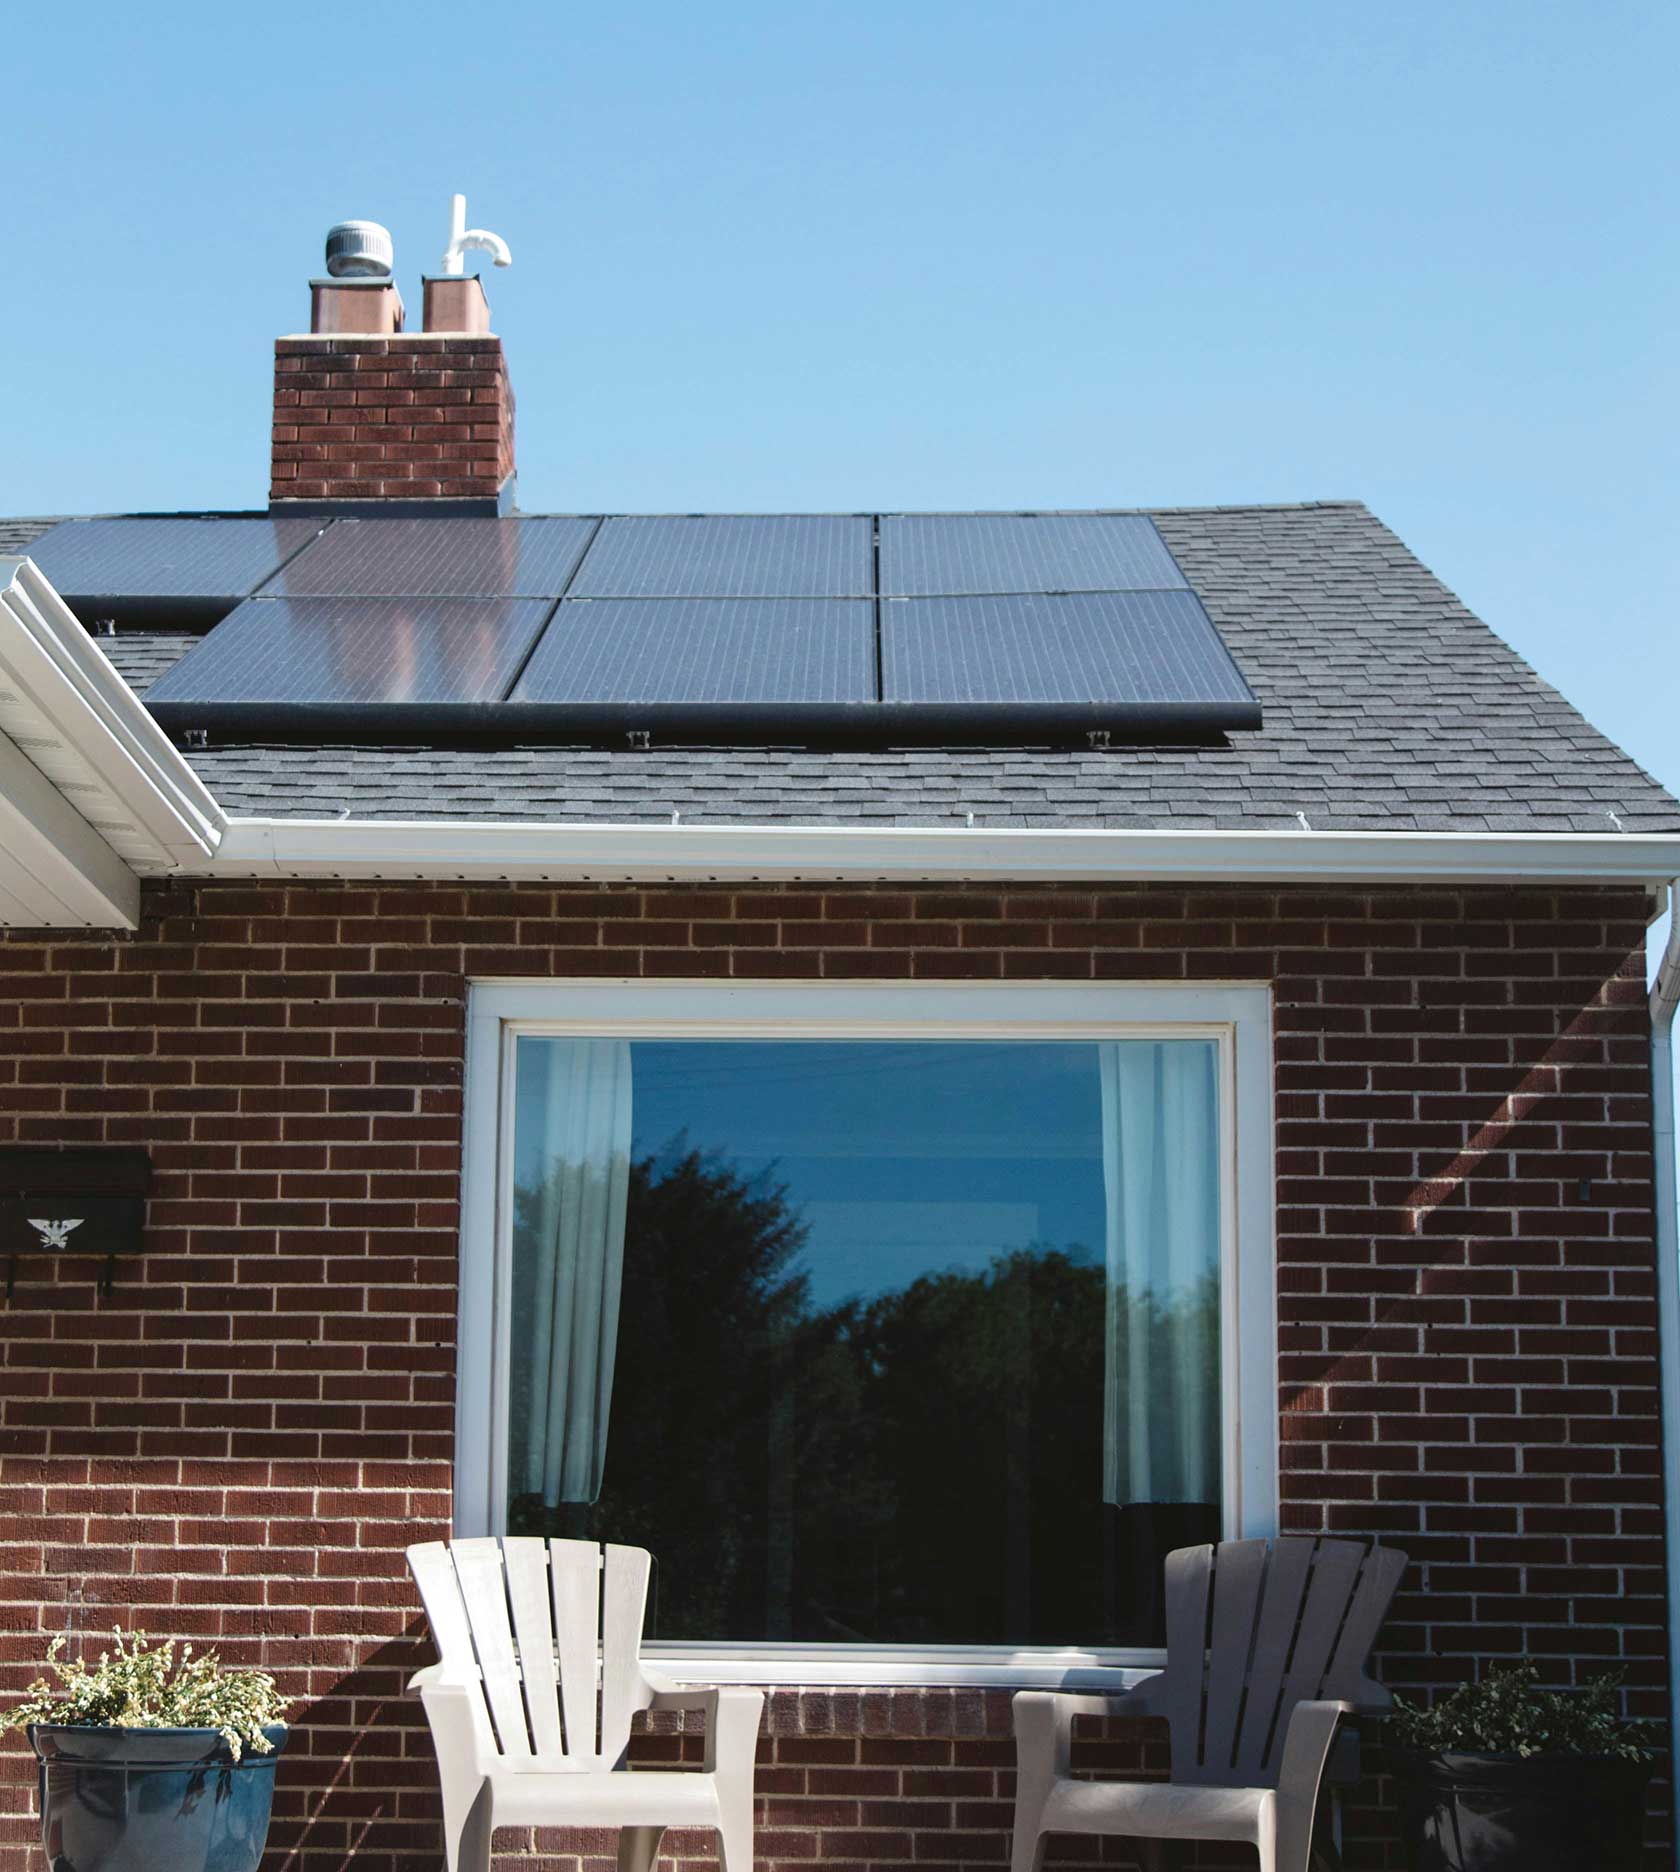 Third-party rooftop solar pitches can often hide costs